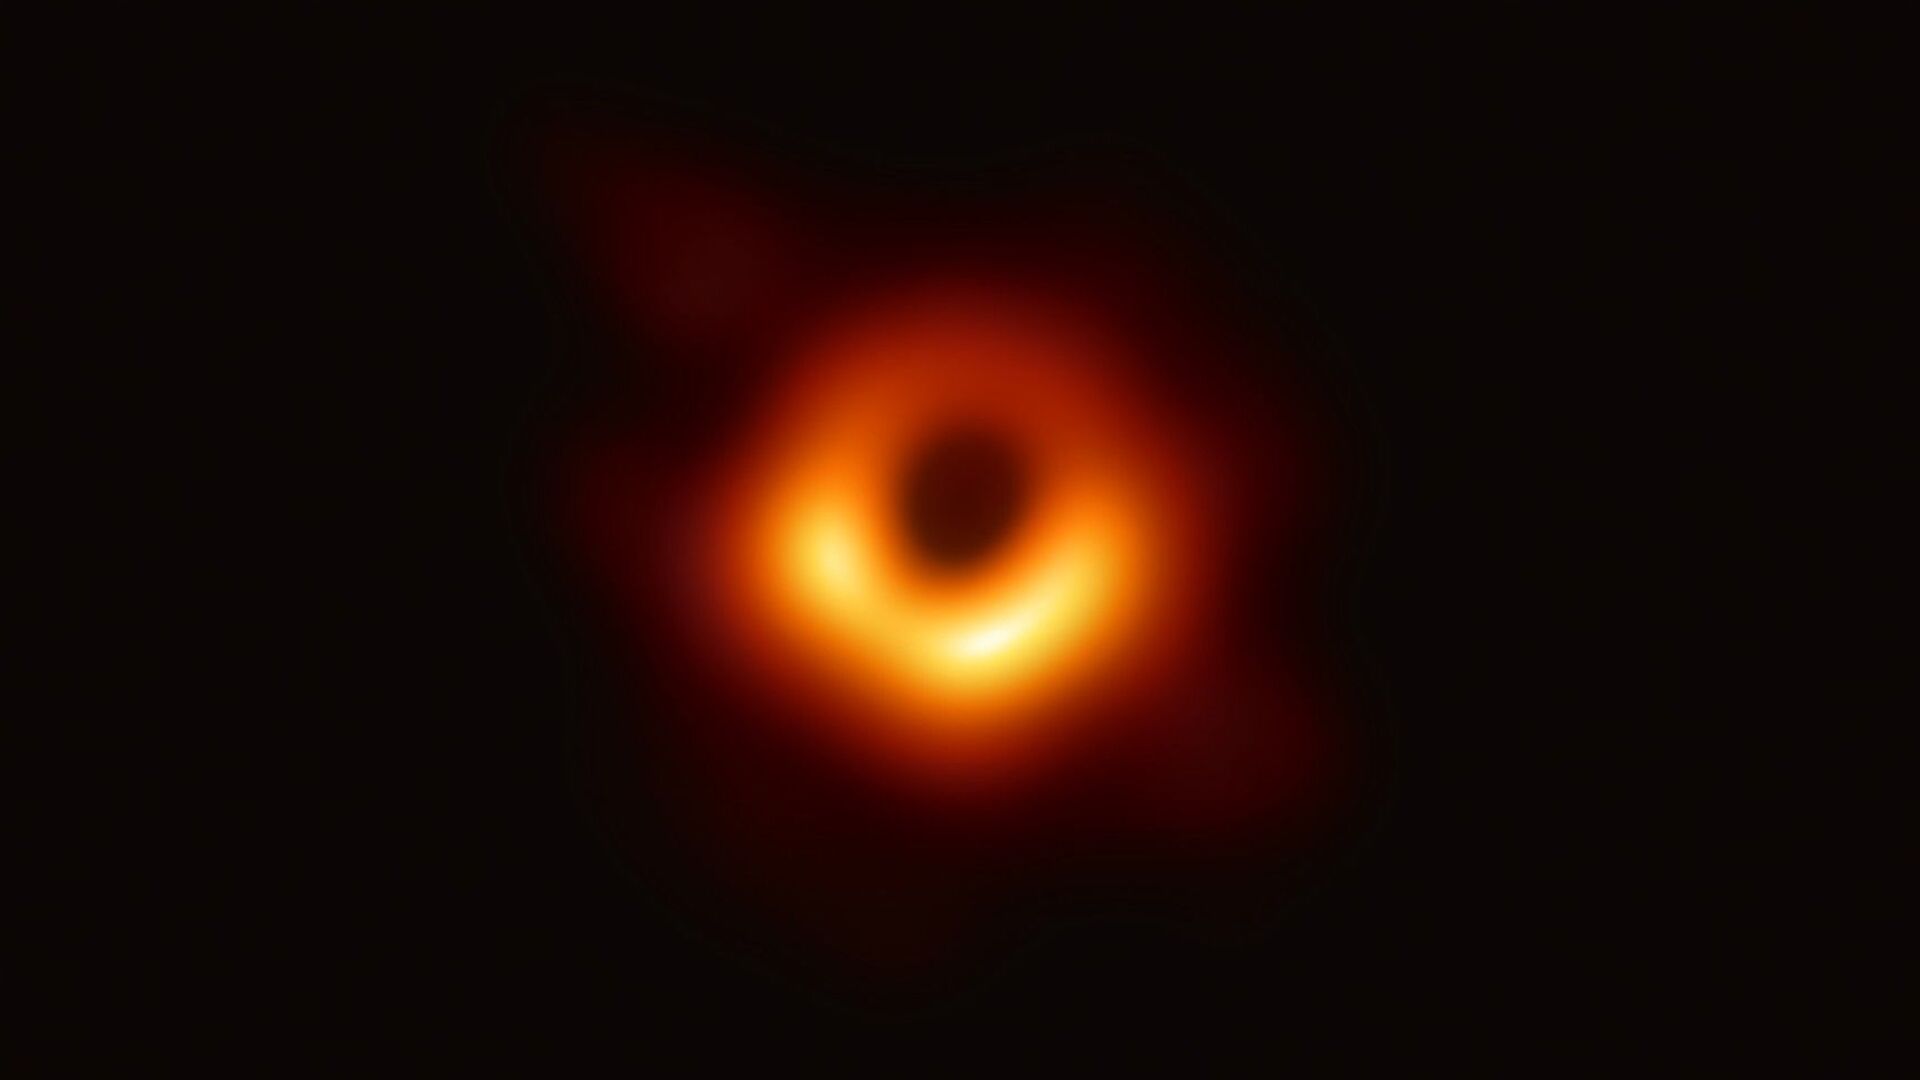 Using the Event Horizon Telescope, scientists obtained an image of the black hole at the center of galaxy M87, outlined by emission from hot gas swirling around it under the influence of strong gravity near its event horizon. - Sputnik International, 1920, 16.04.2021